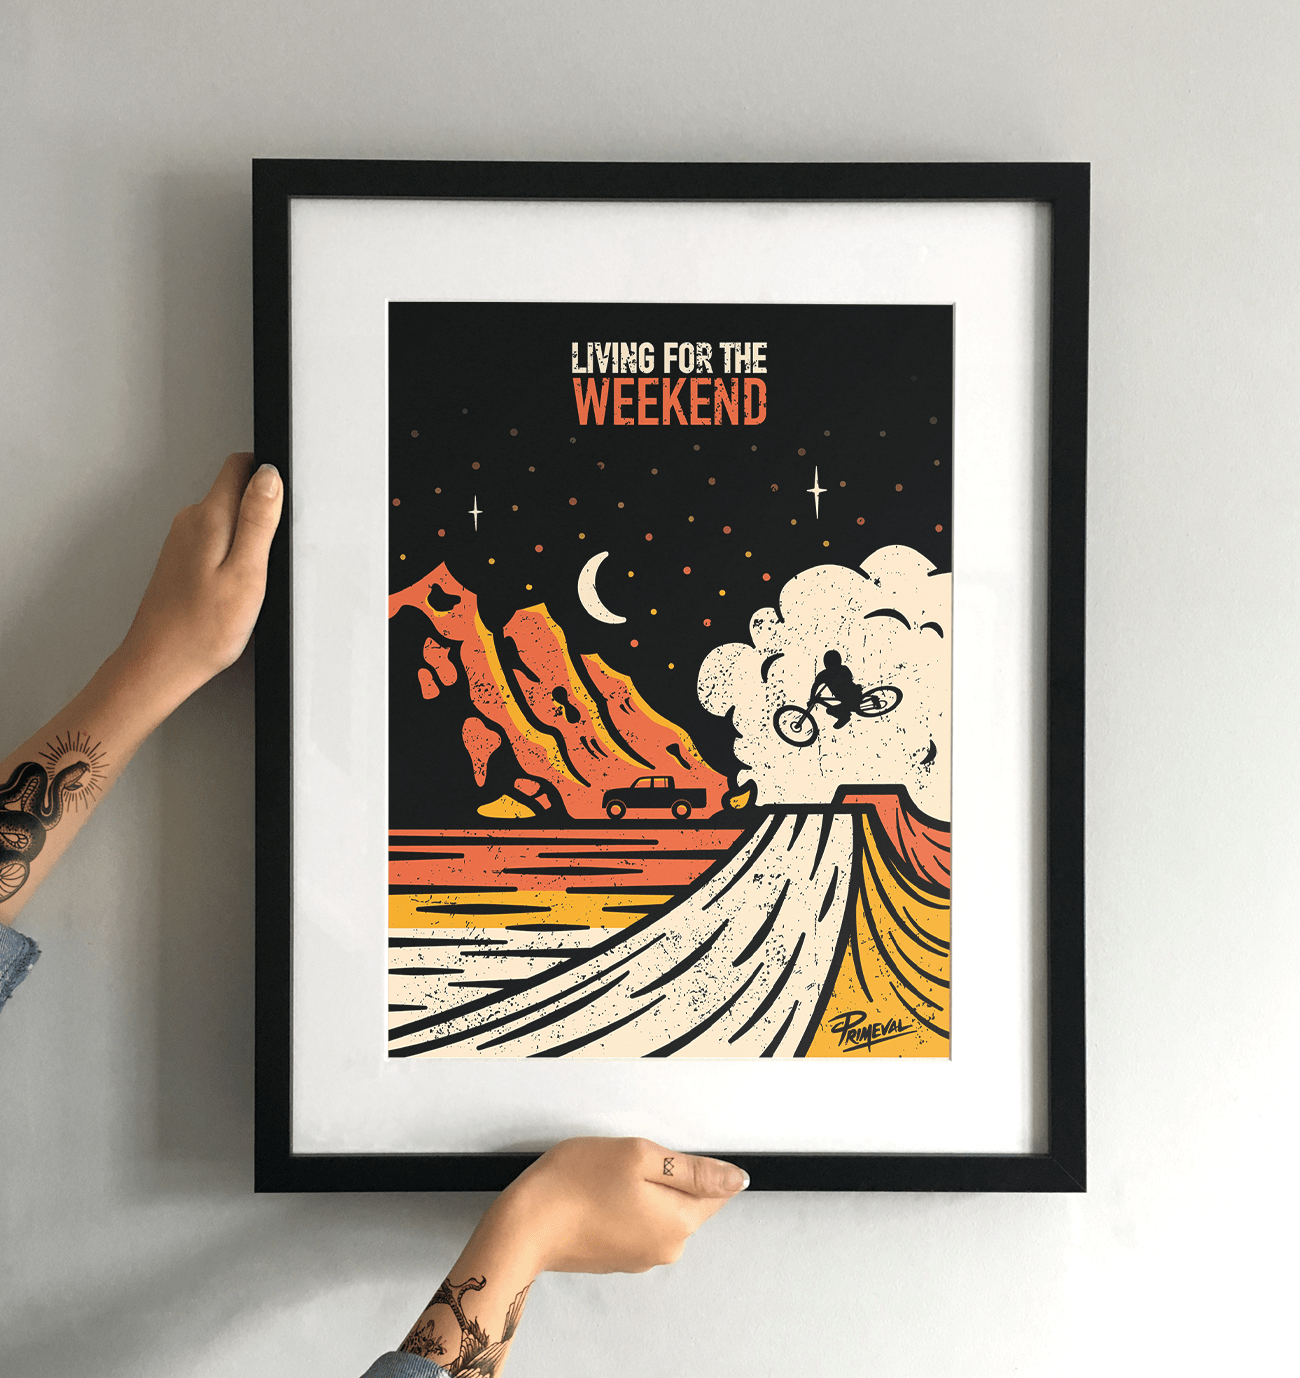 Living for the Weekend' Art Print - TrailMaps.co.uk